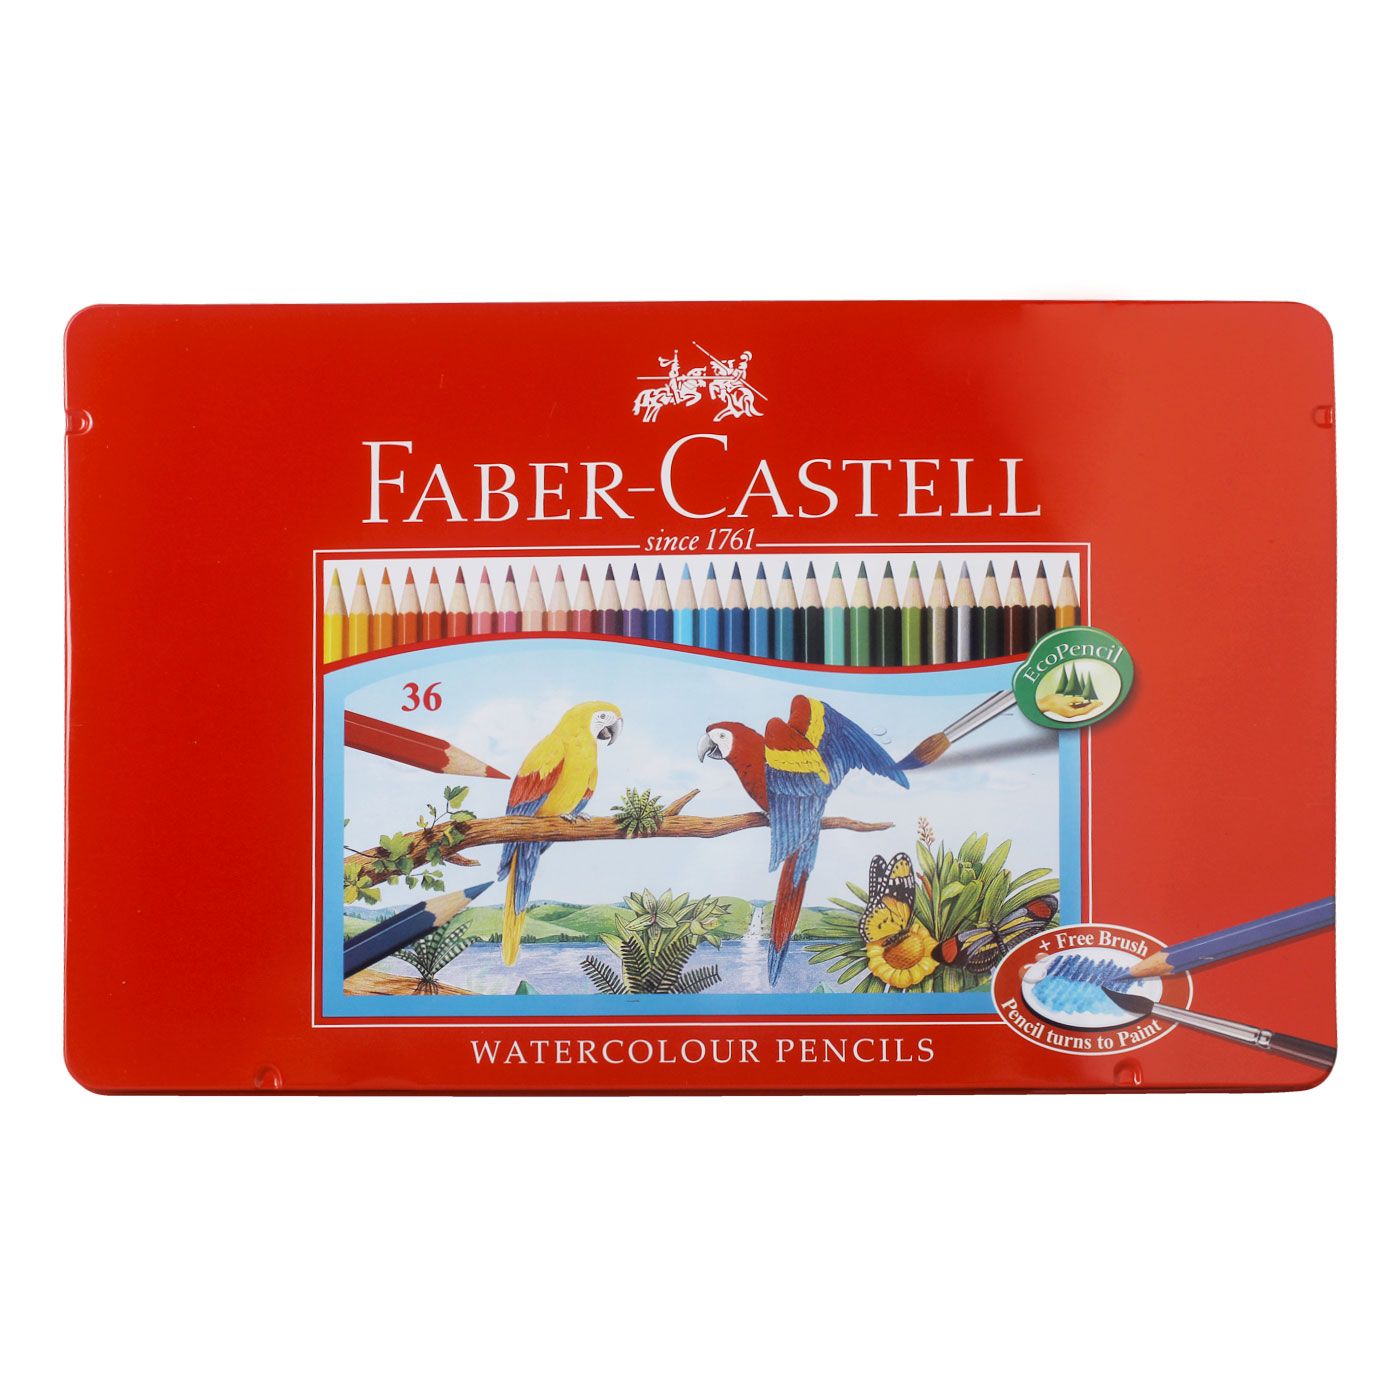 Faber Castell Watercolour Pencils in Tin Case (Isi 36) - 1